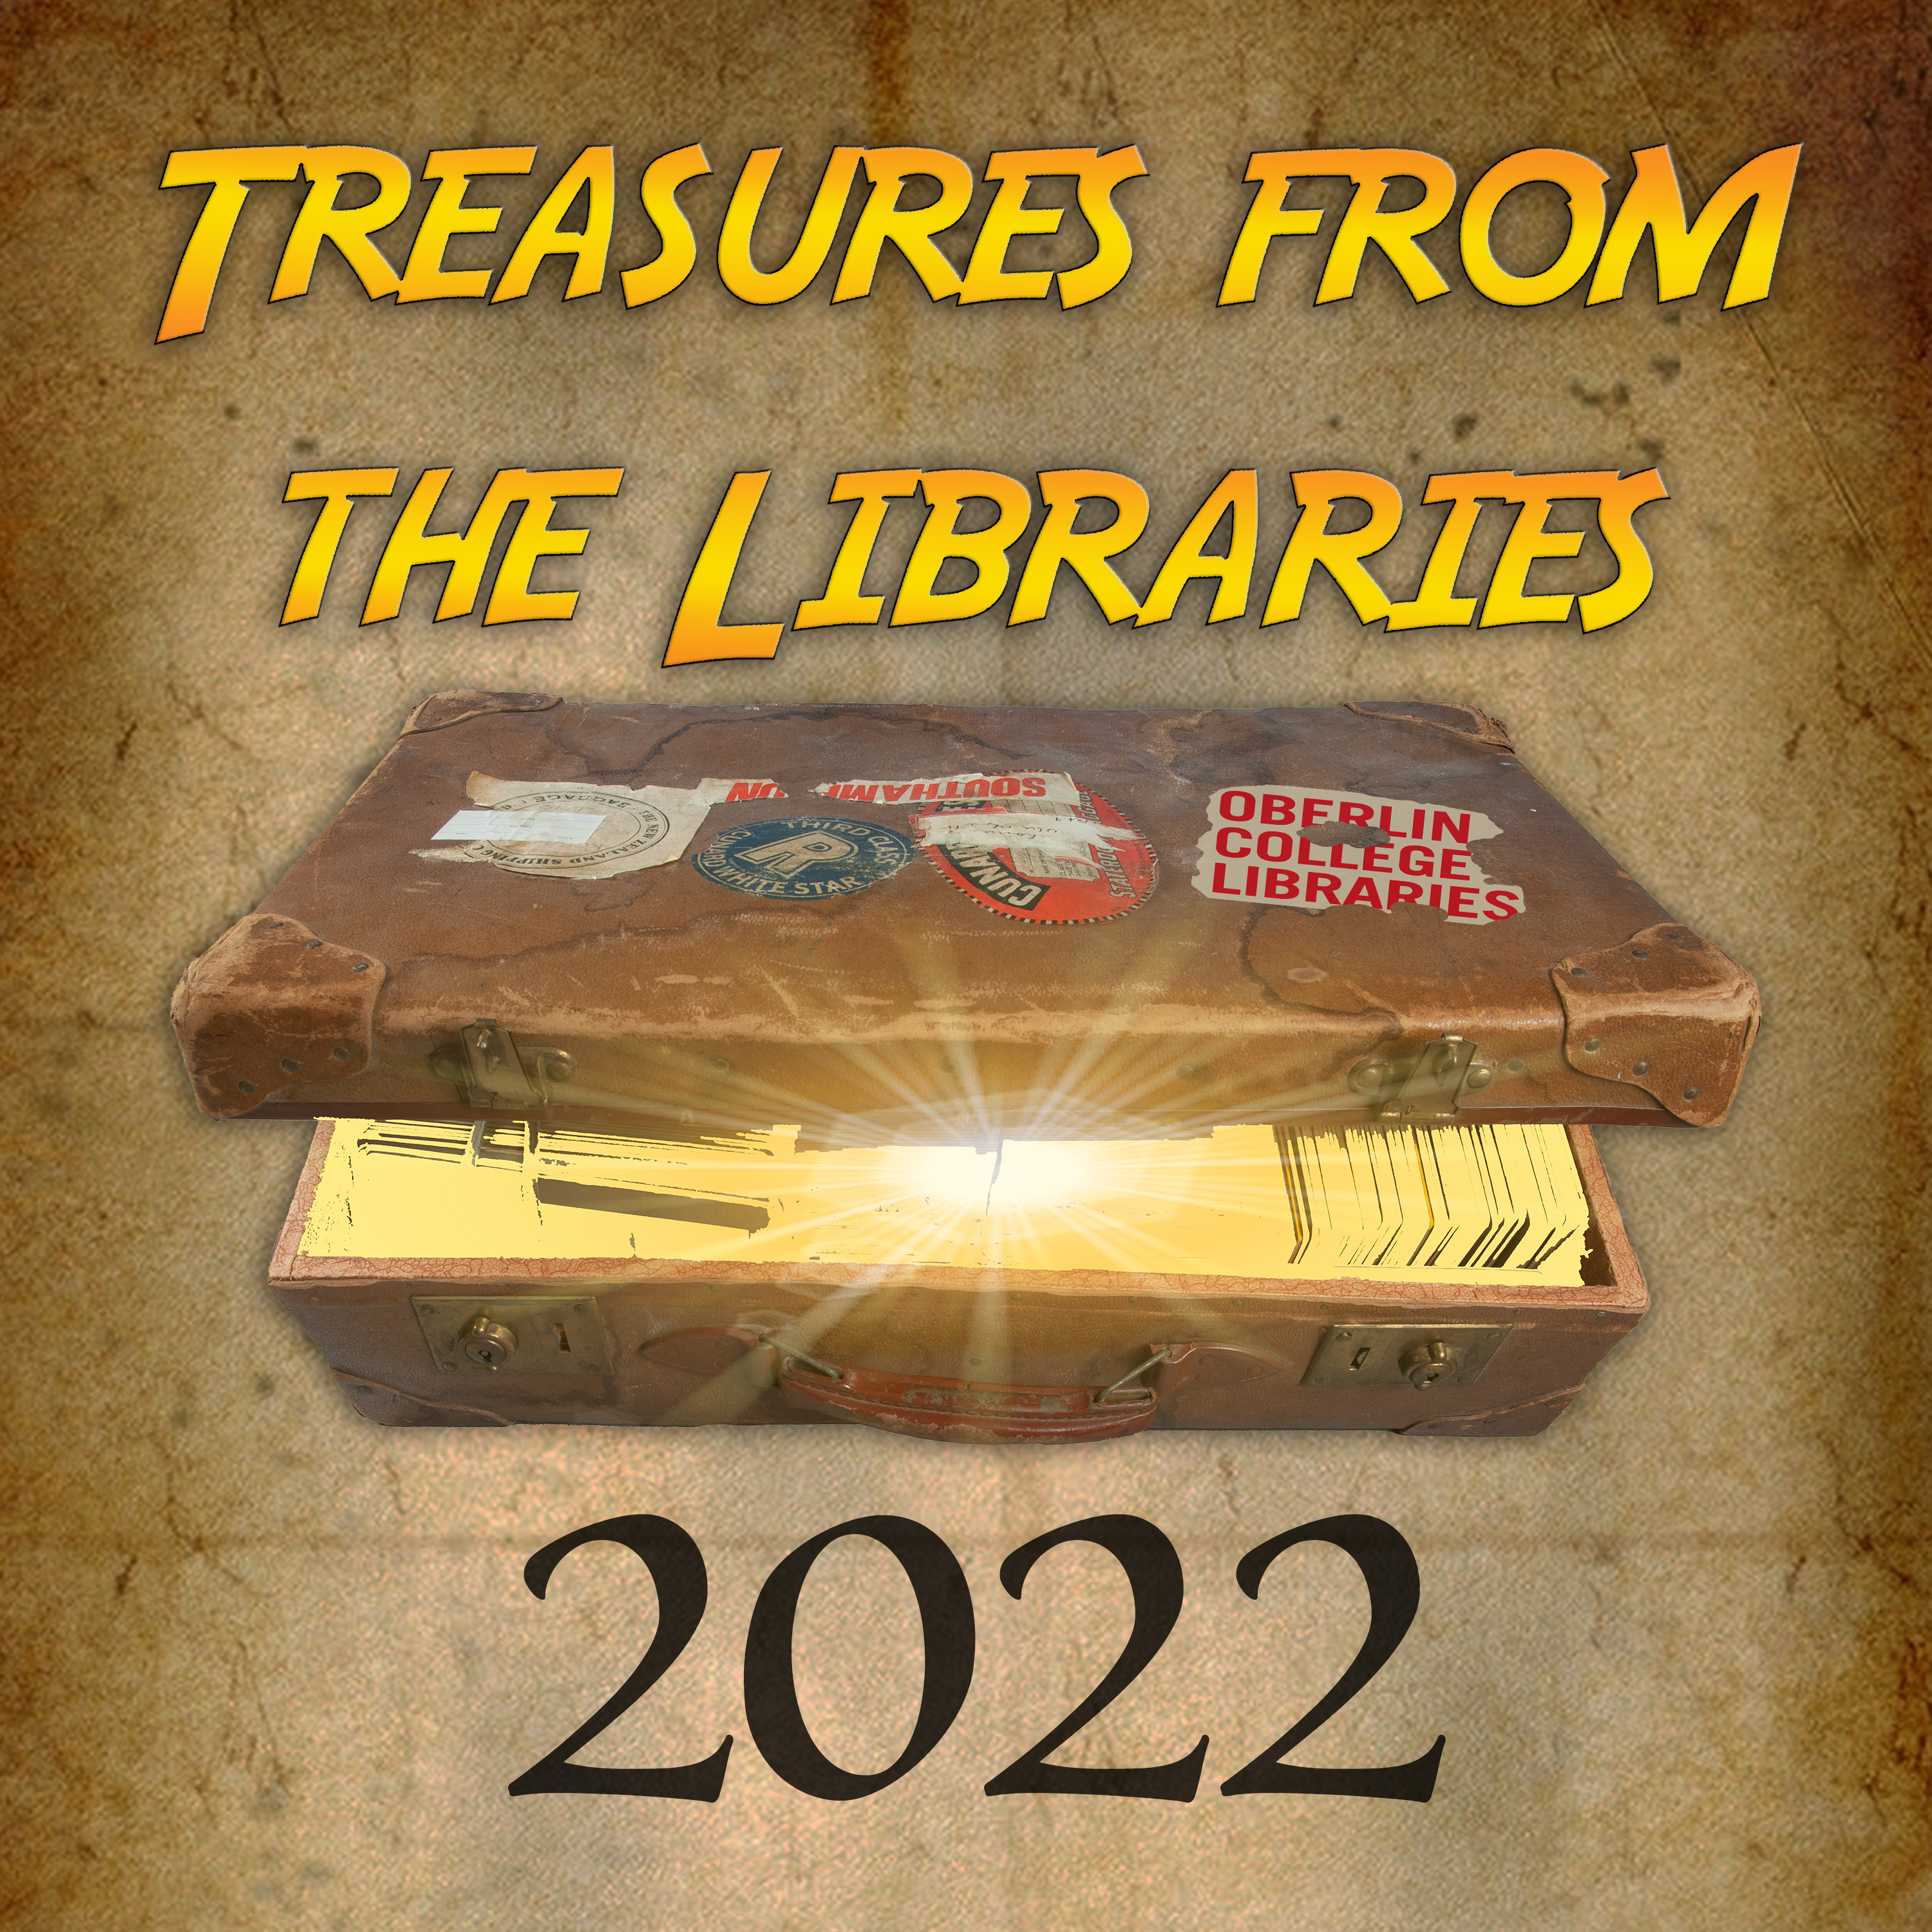 Oberlin 2022 Calendar Oberlin College Libraries On Twitter: "There Is Still Time To Get Ocl's  Annual Calendar! Click To Learn How Your Gift To The  #Terrellendowedbookfund Can Get You A Copy Of Our 2022 "Treasures